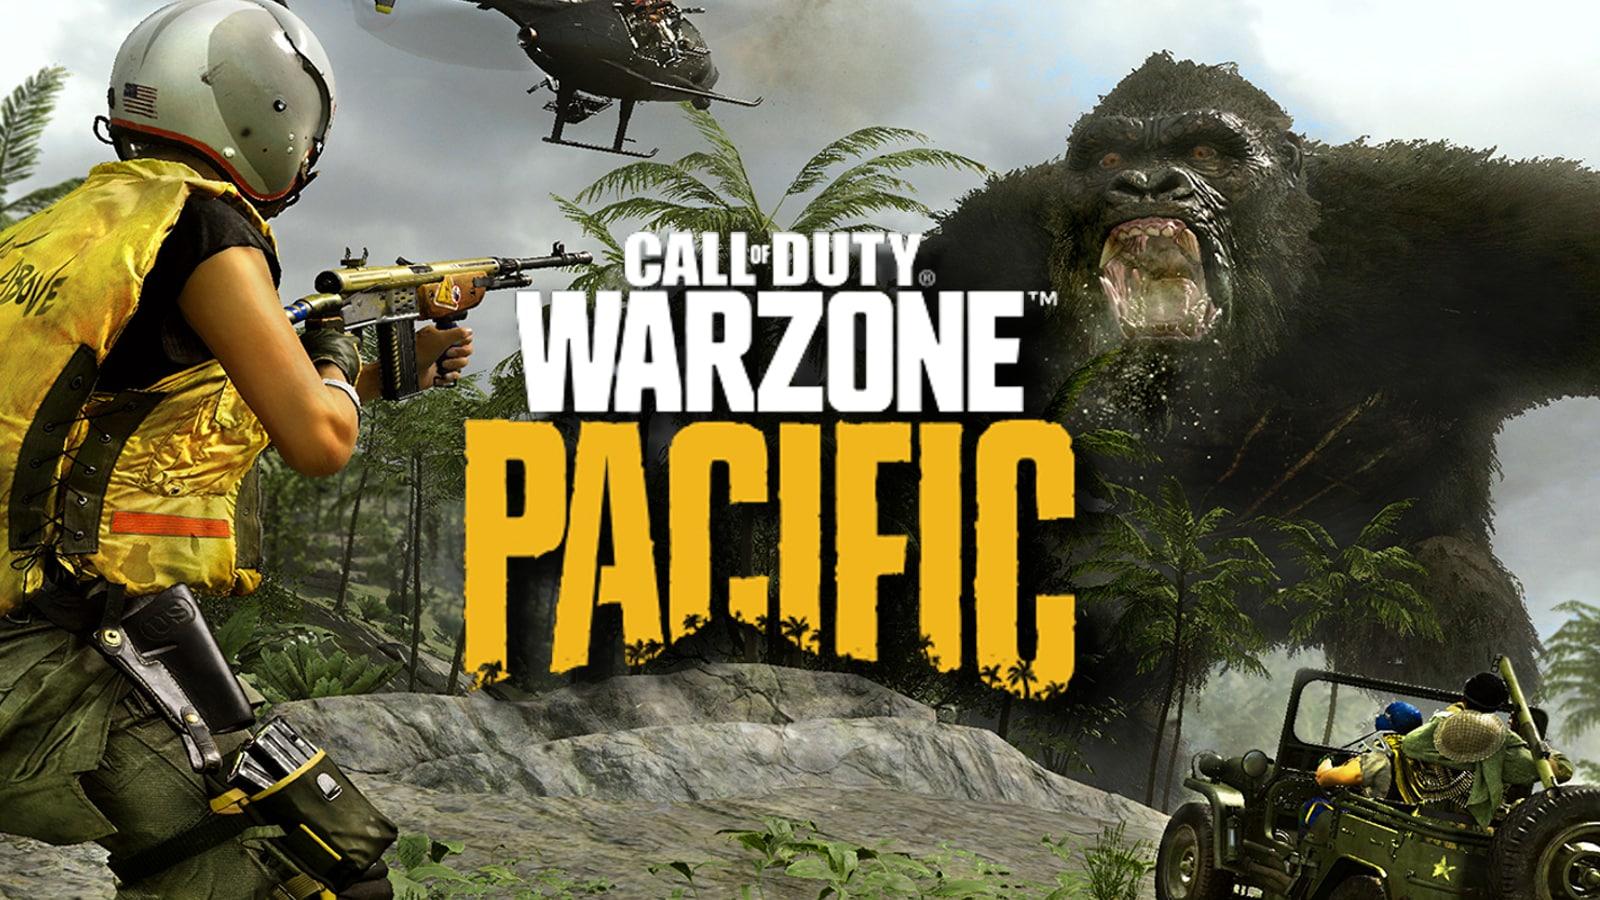 King Kong in Warzone Pacific